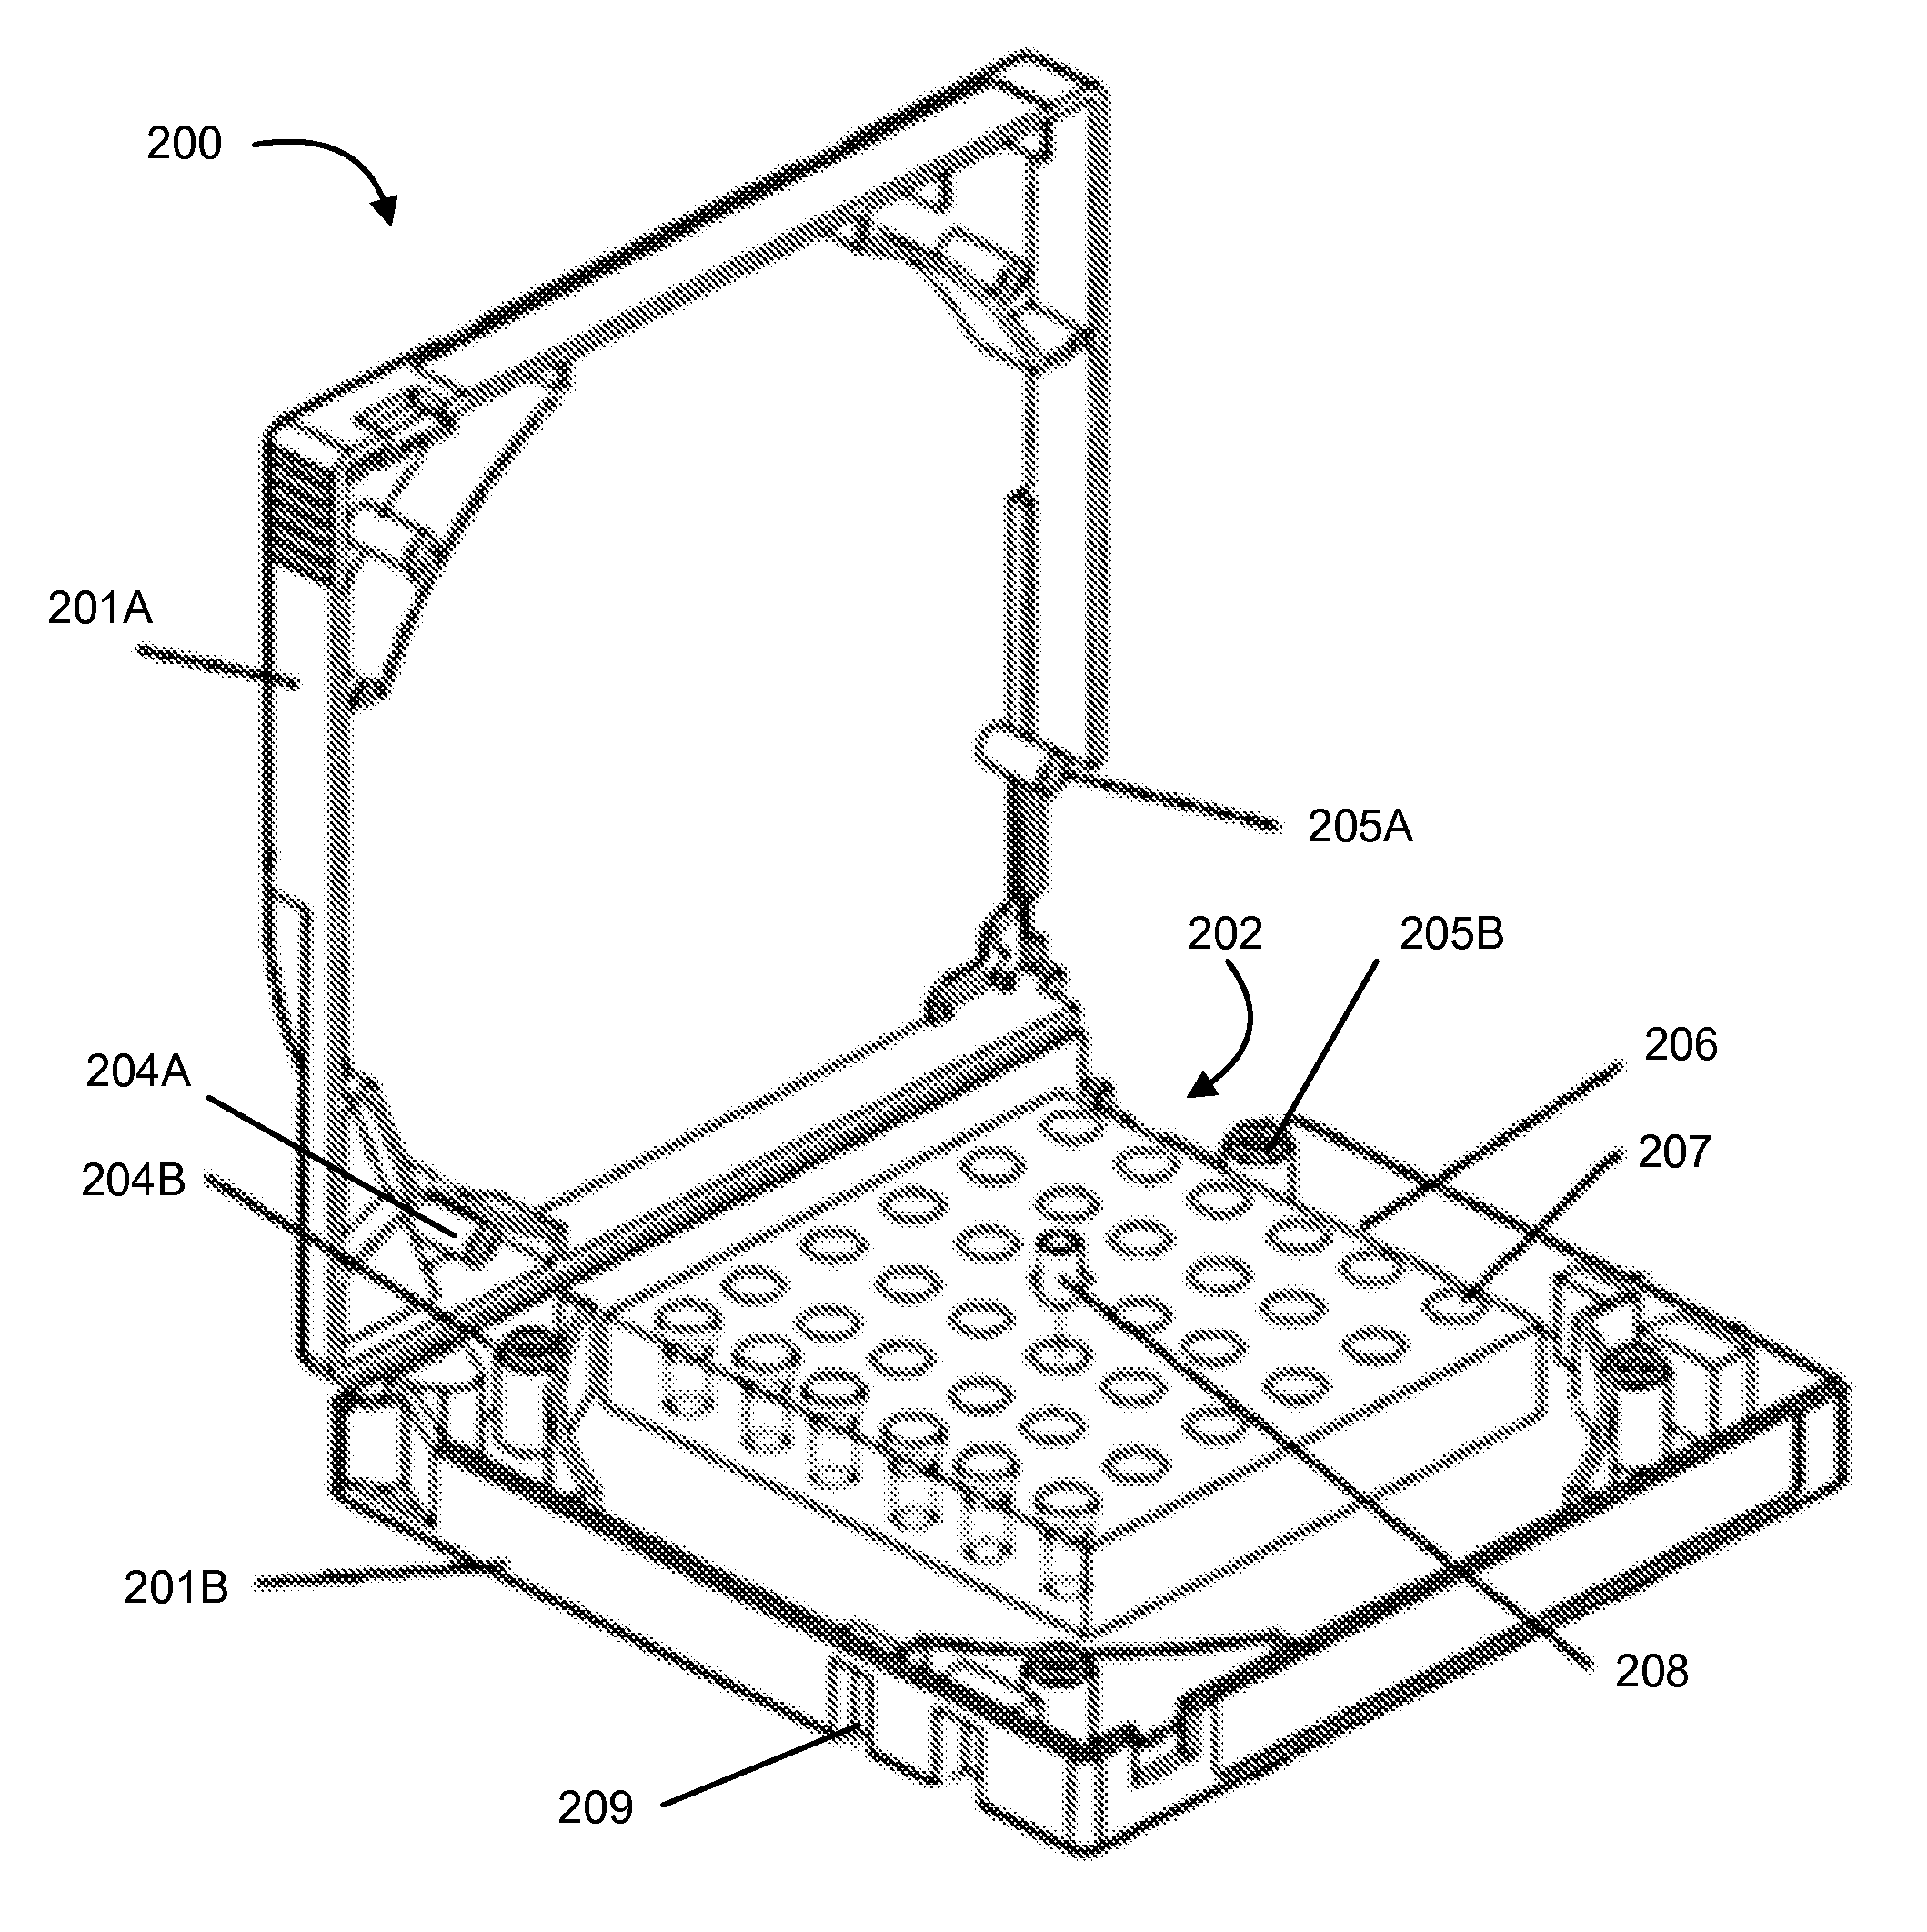 Cartridge for storing biosample capillary tubes and use in automated data storage systems